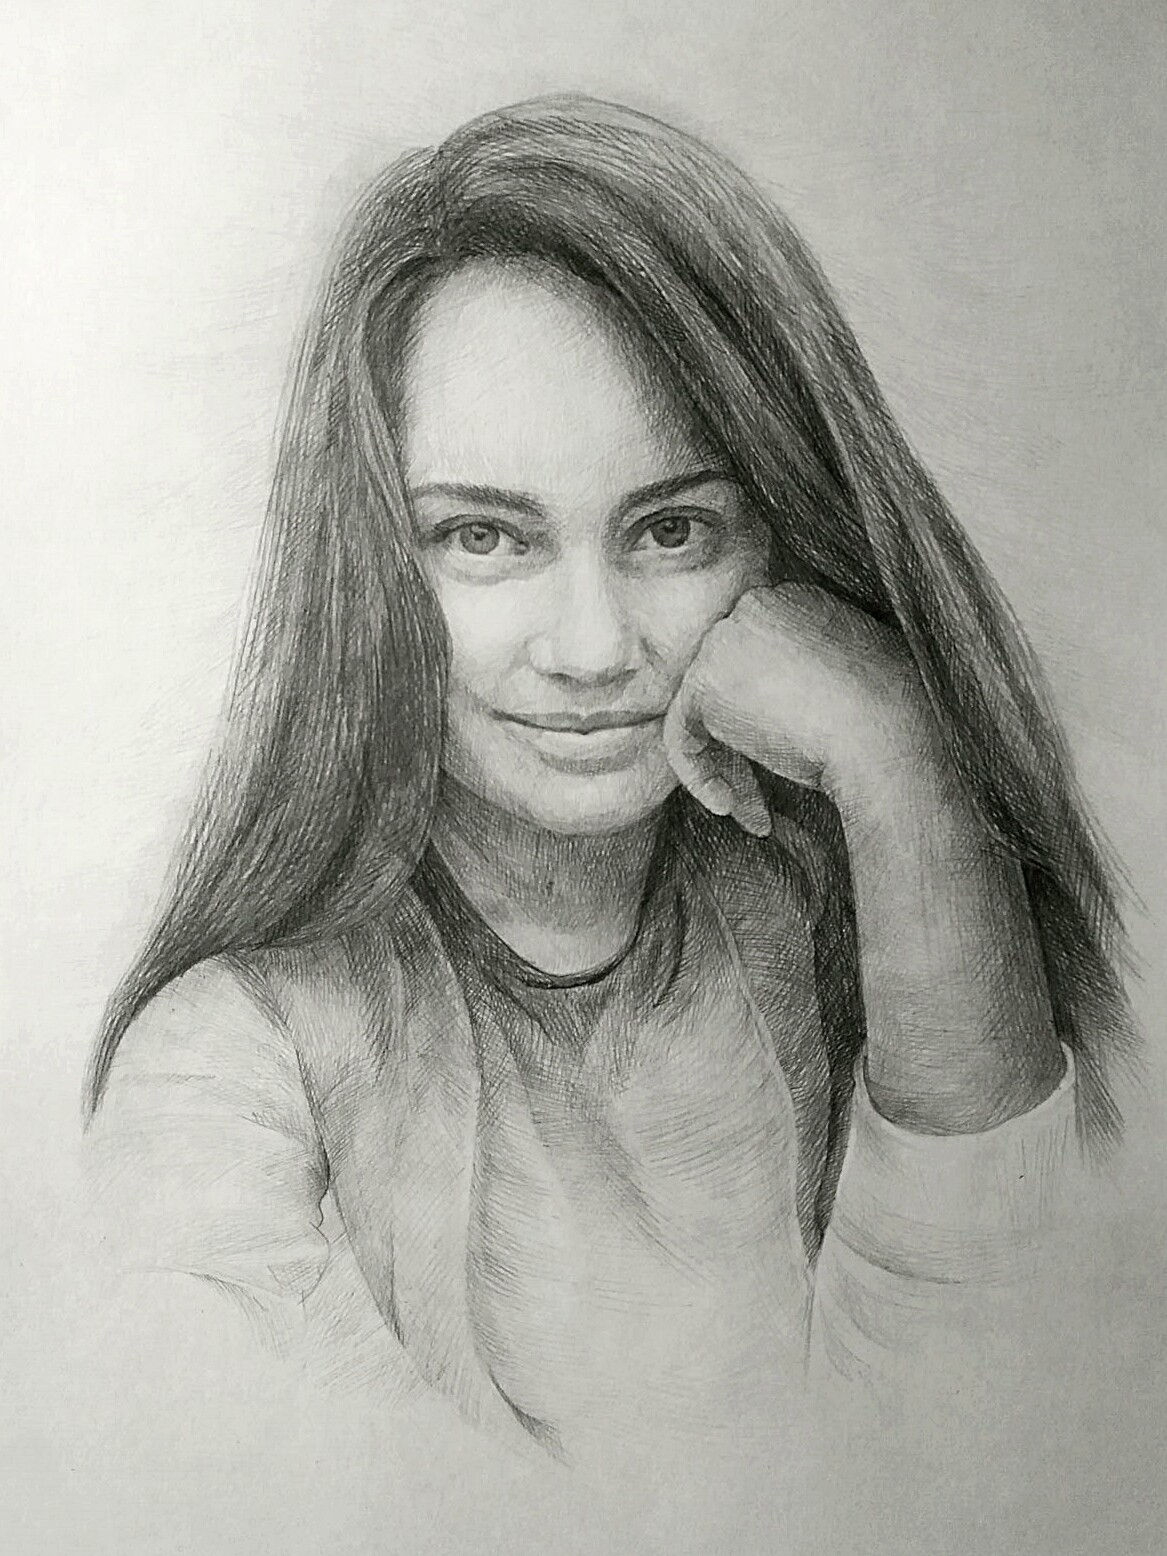 ArtStation - Realistic pencil drawing of the girl